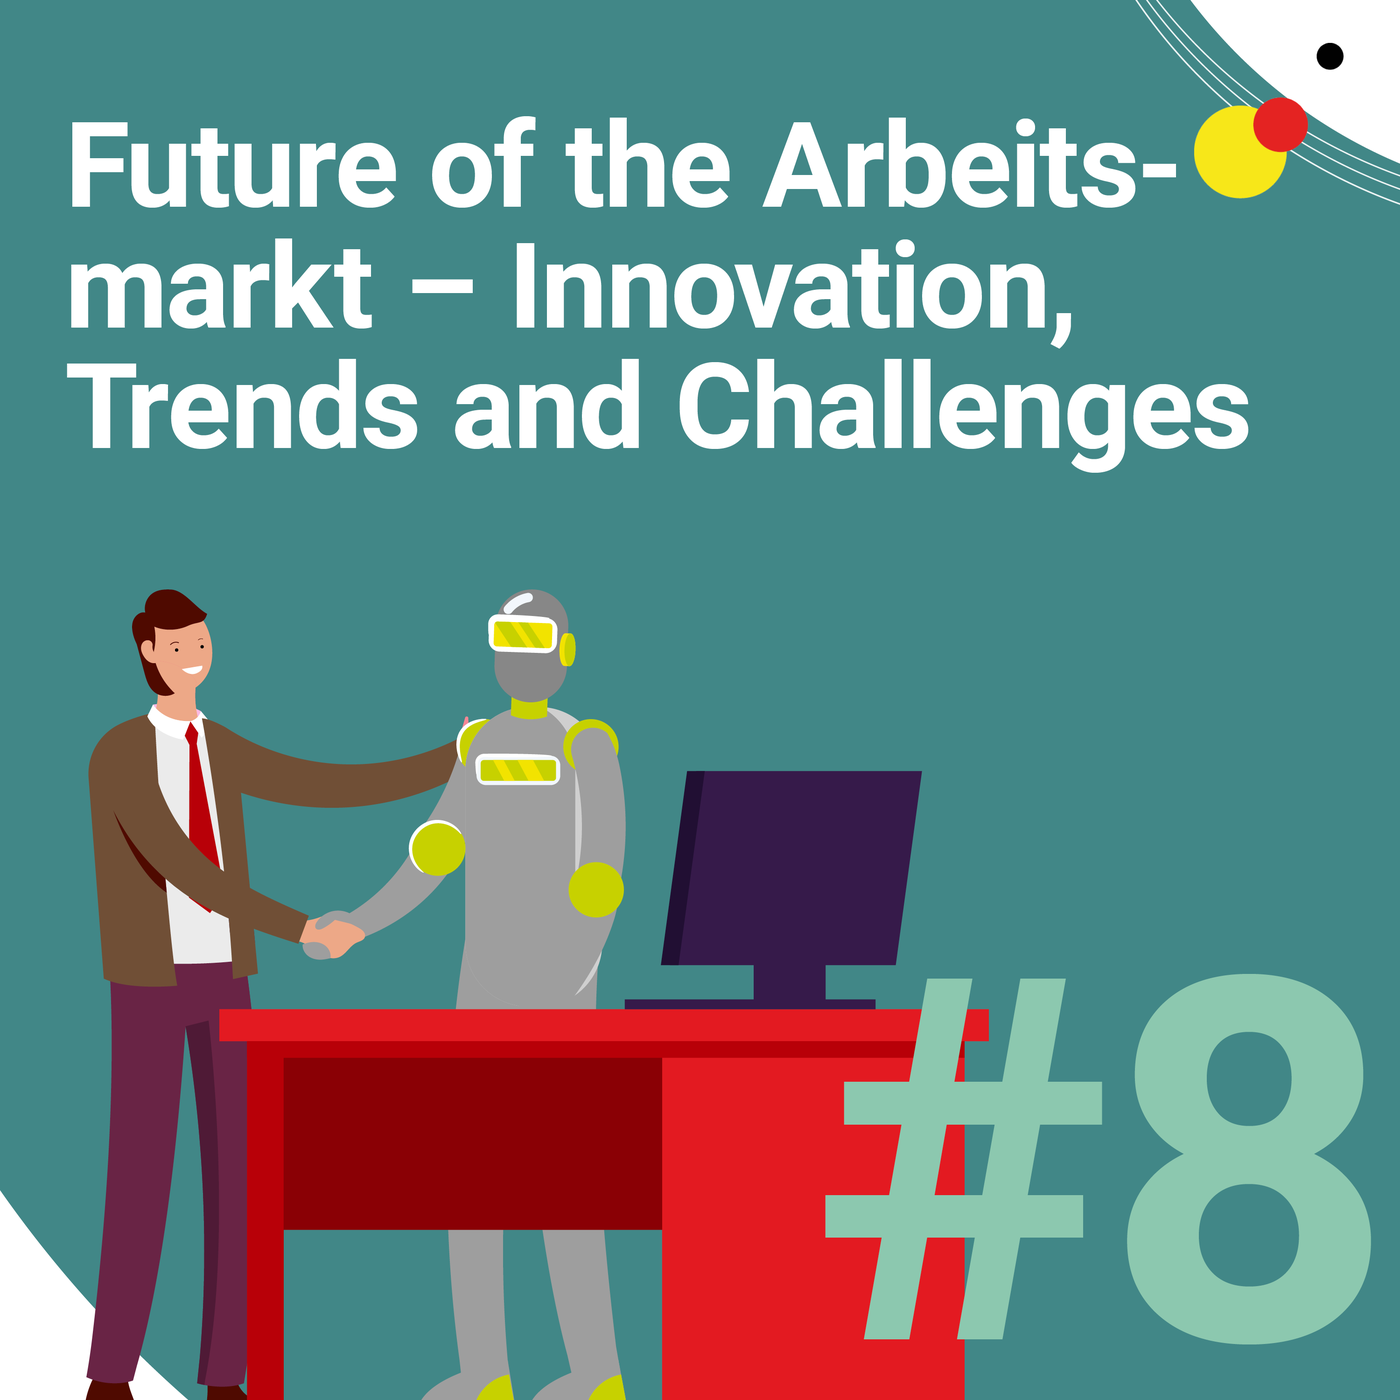 #8 Future of the Arbeitsmarkt - Innovation, Trends and Challenges